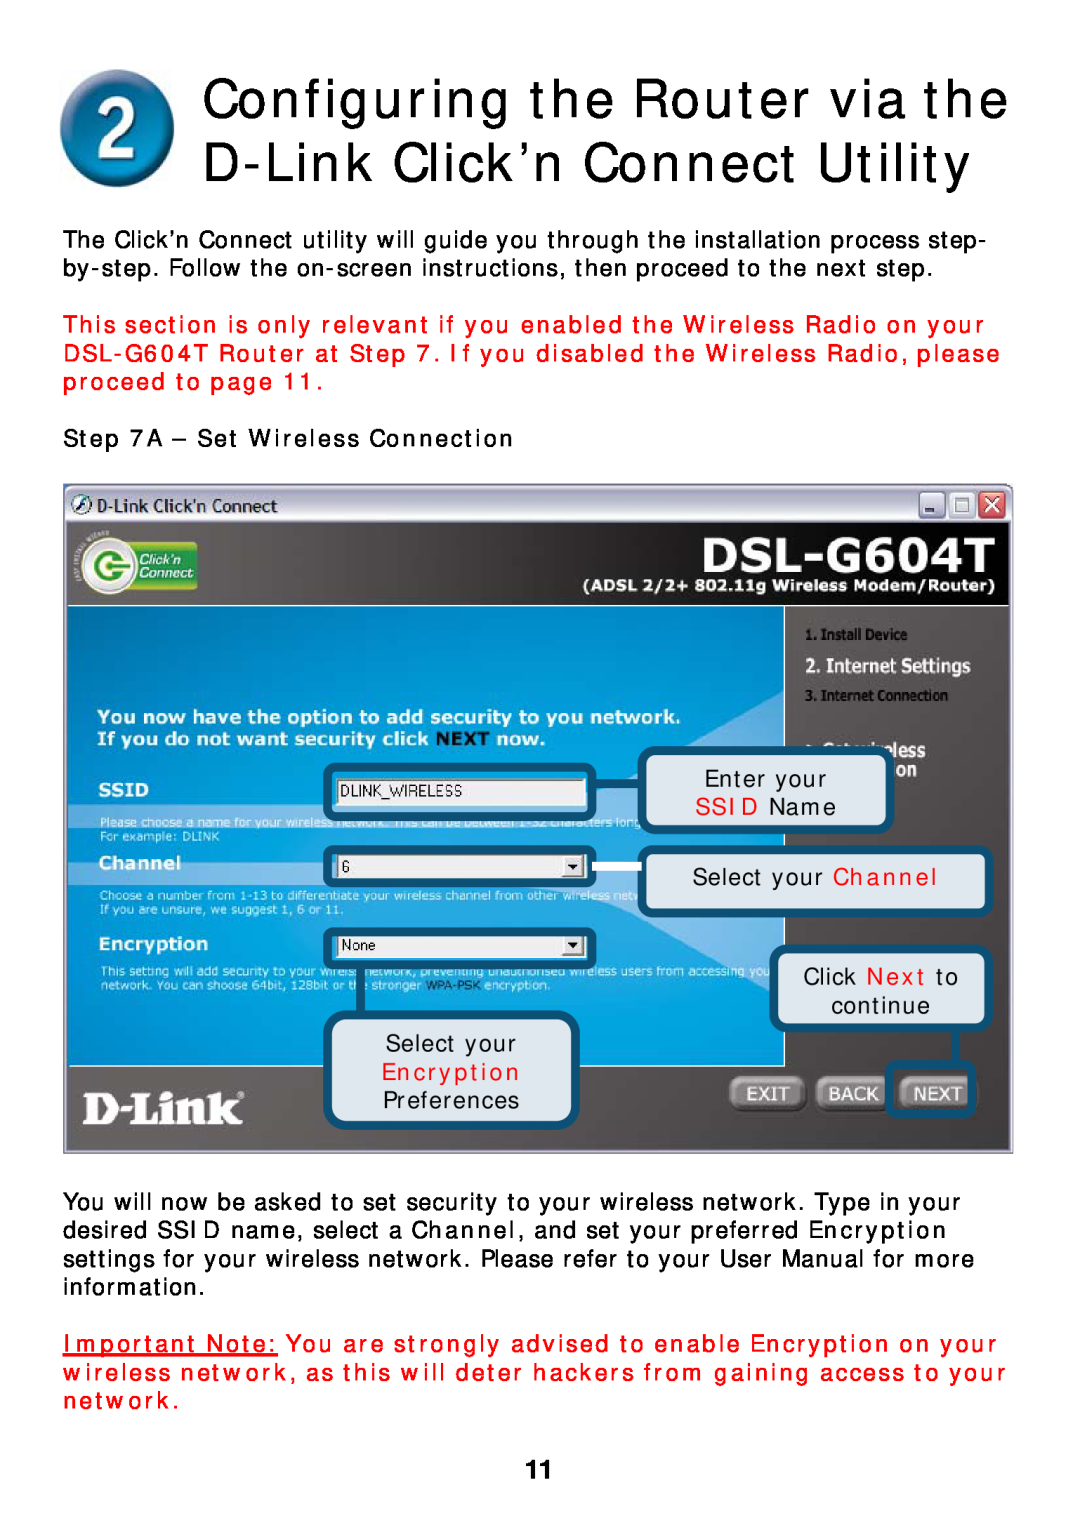 D-Link DSL-G604T specifications Configuring the Router via the D-Link Click’n Connect Utility, A - Set Wireless Connection 